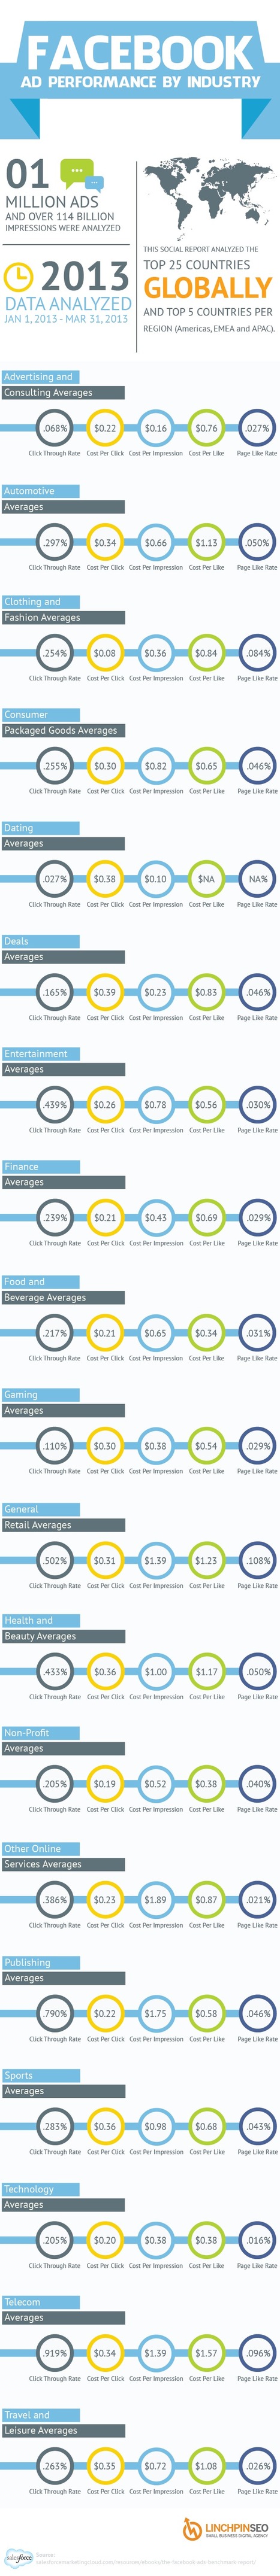 [Infographic] Facebook Ad Performance by Industry | MarketingHits | Scoop.it